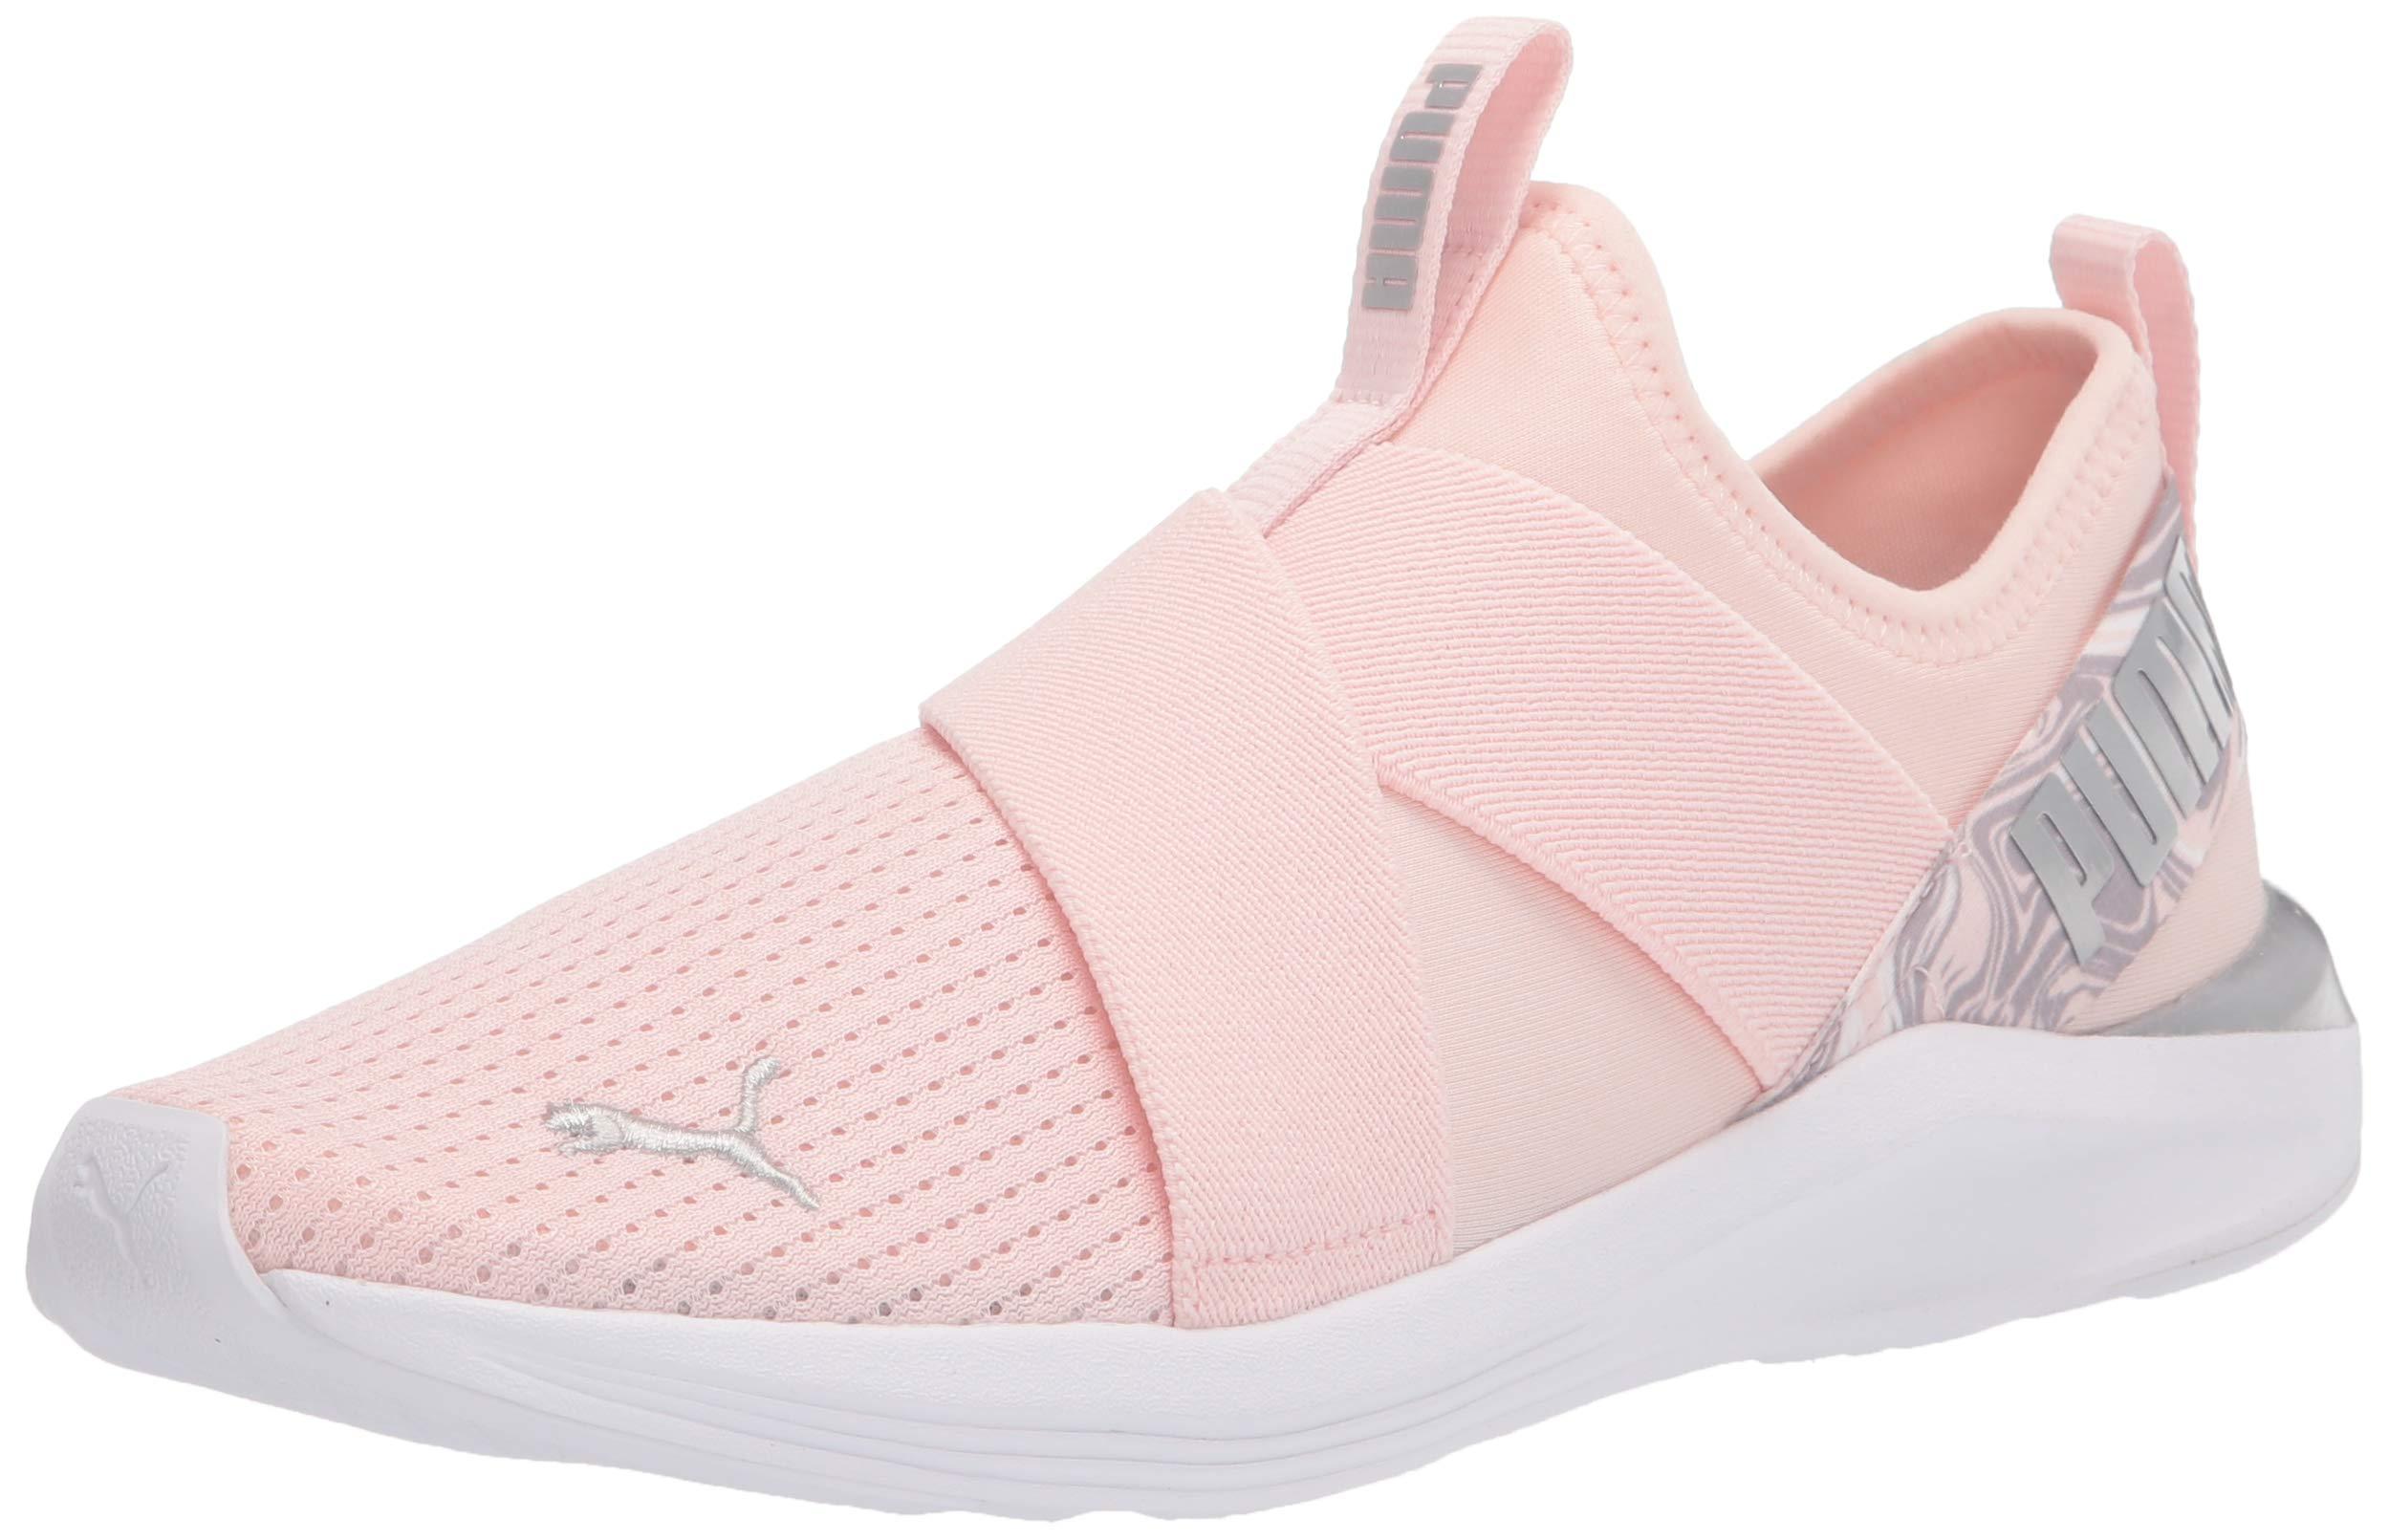 PUMA Rubber Prowl Slip On Cross Trainer in White - Save 58% | Lyst